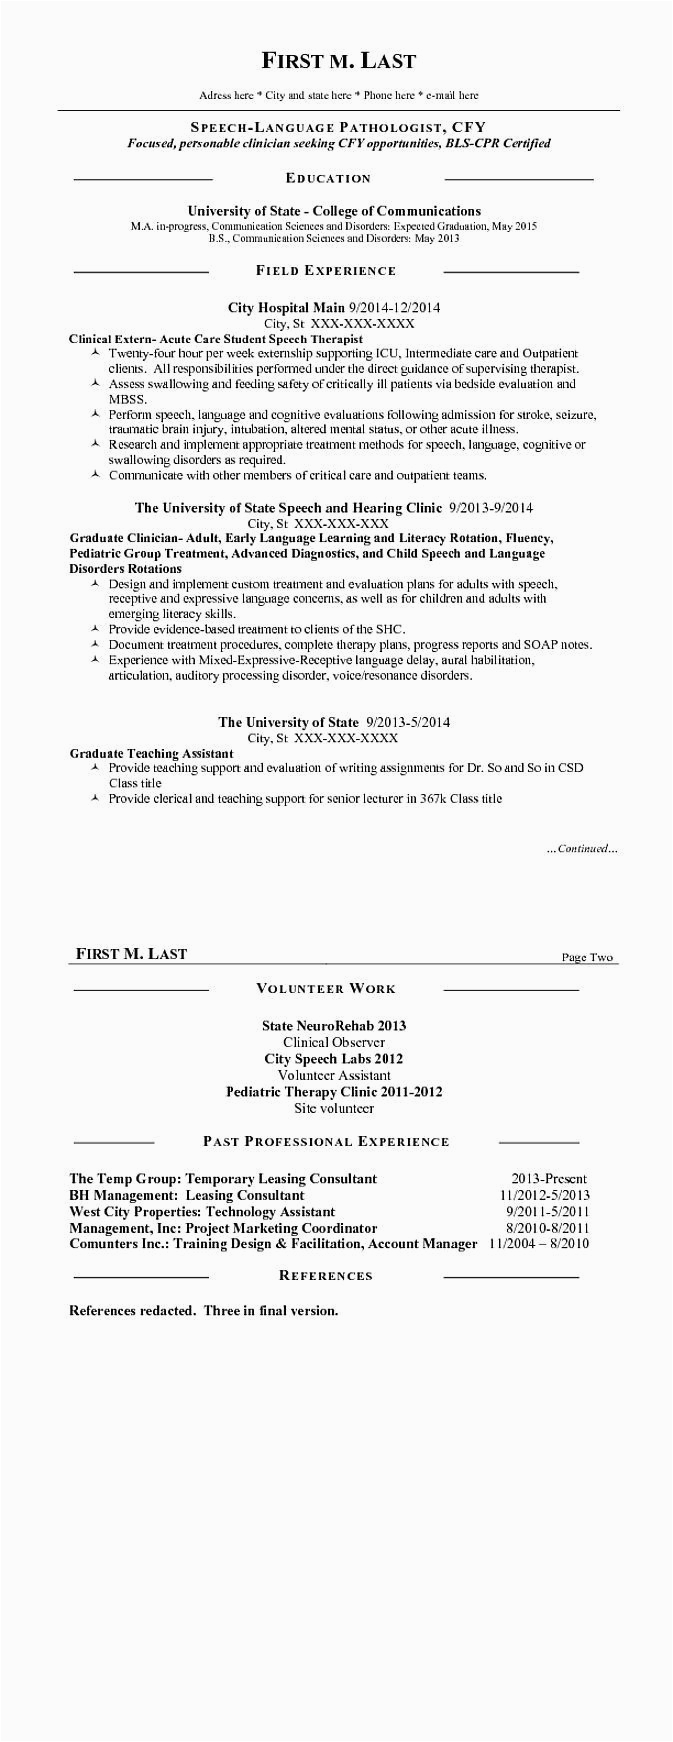 Sample Objective Statement for Slp Resume Sample Resume for Speech Language Pathologist Cool How You Write